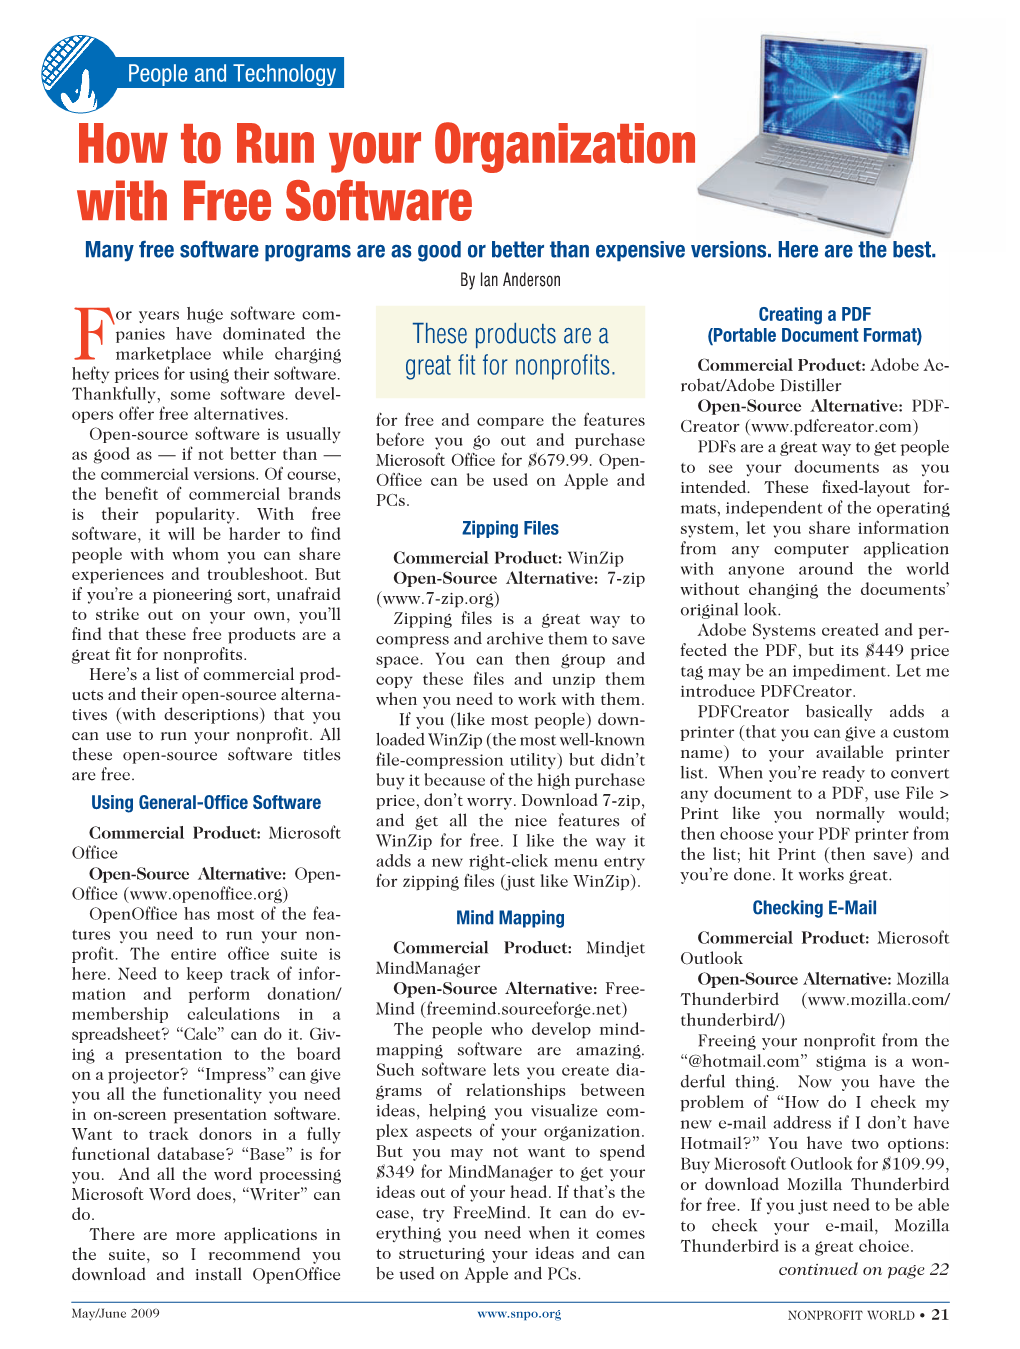 How to Run Your Organization with Free Software Many Free Software Programs Are As Good Or Better Than Expensive Versions